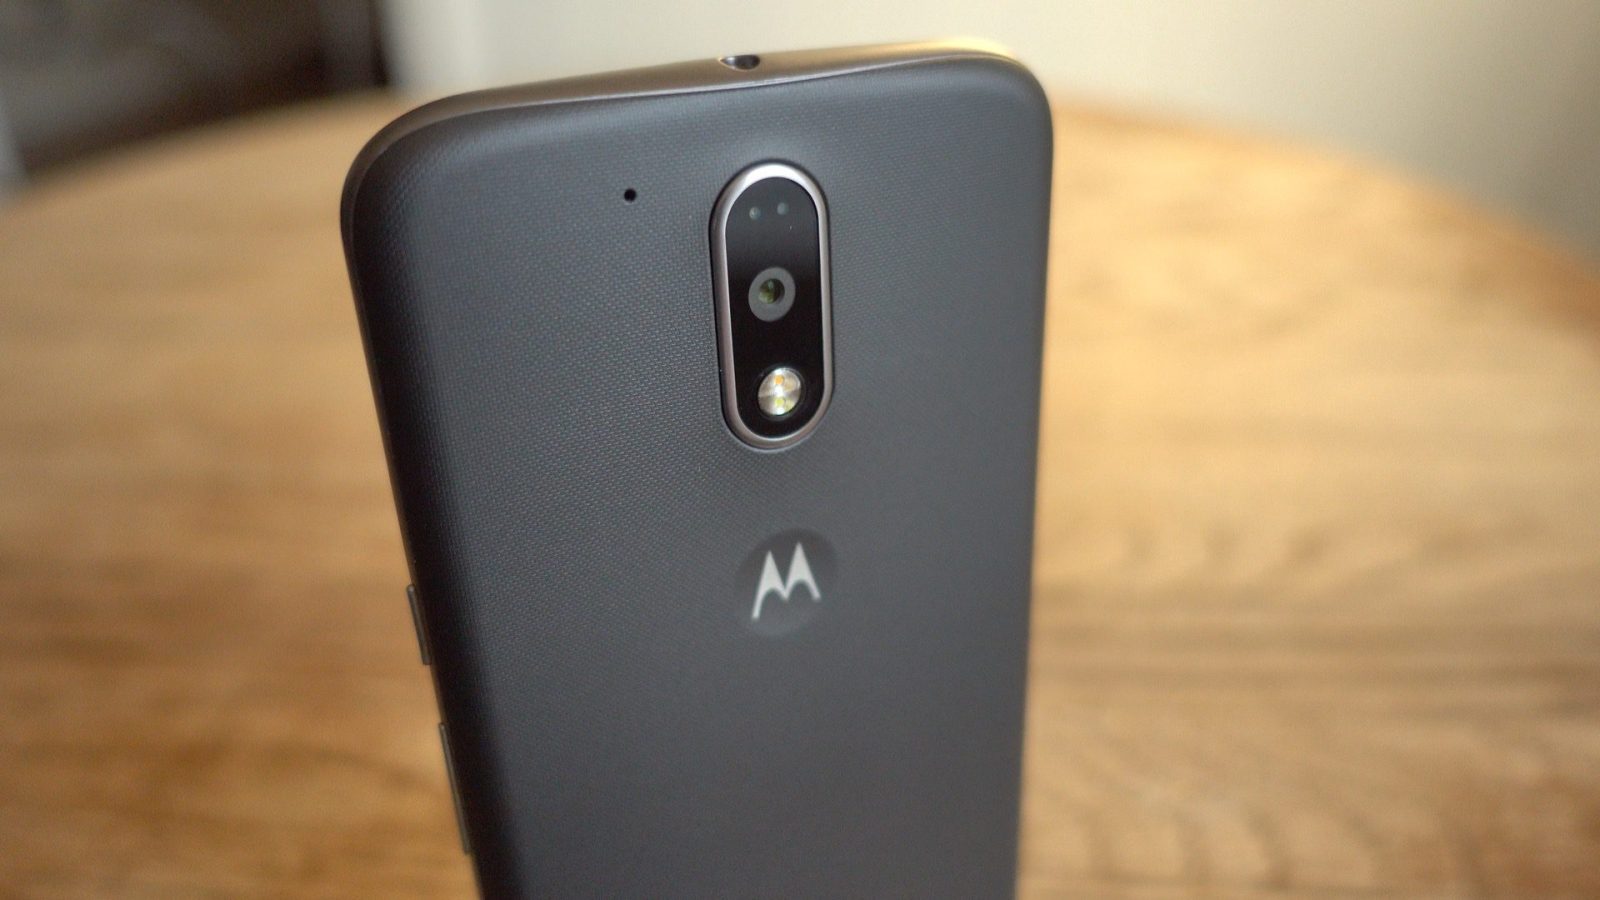 Better late than never? Moto G4 Plus gets Android 8.1 Oreo update : r/MotoG